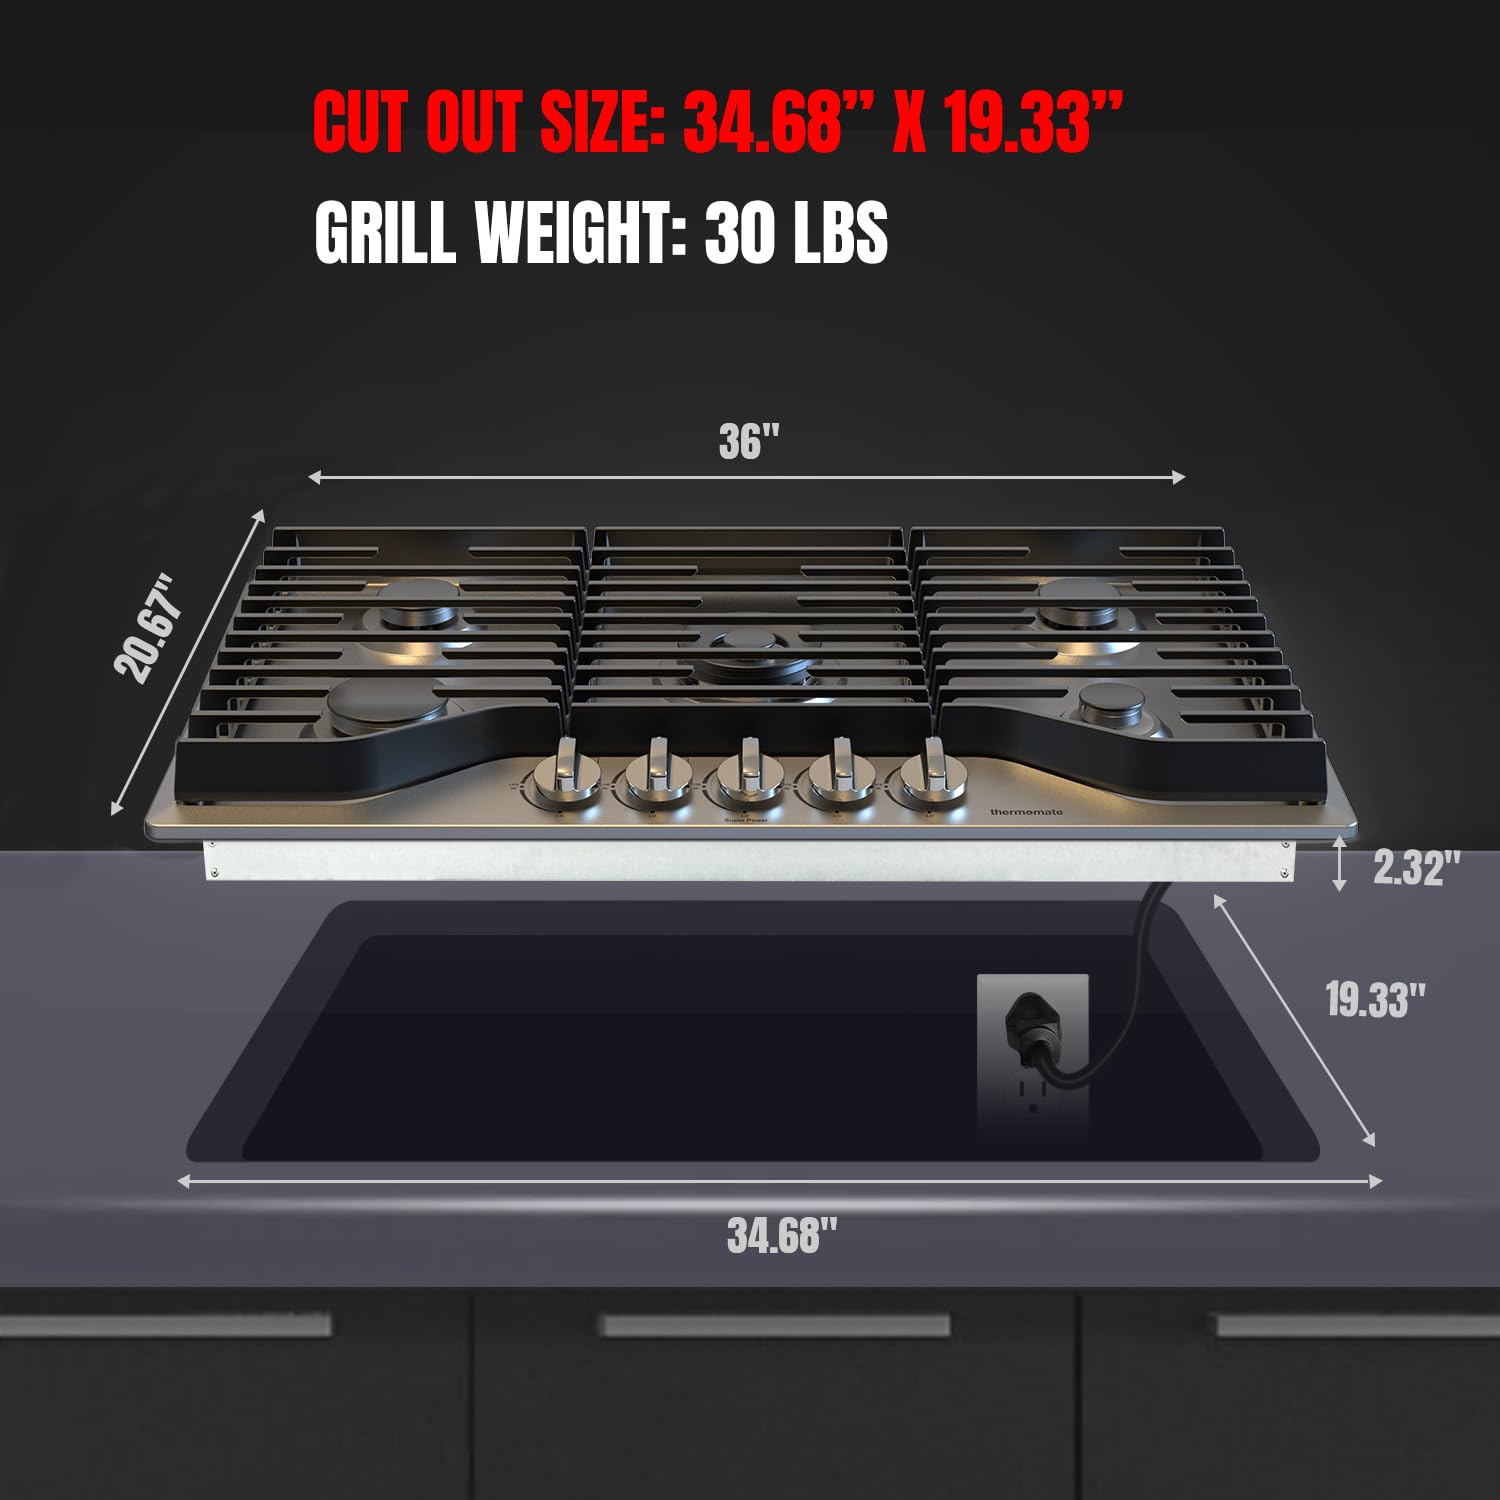 CUT OUT SIZE: 34.68” X 19.33” GRILL WEIGHT: 3O LBS